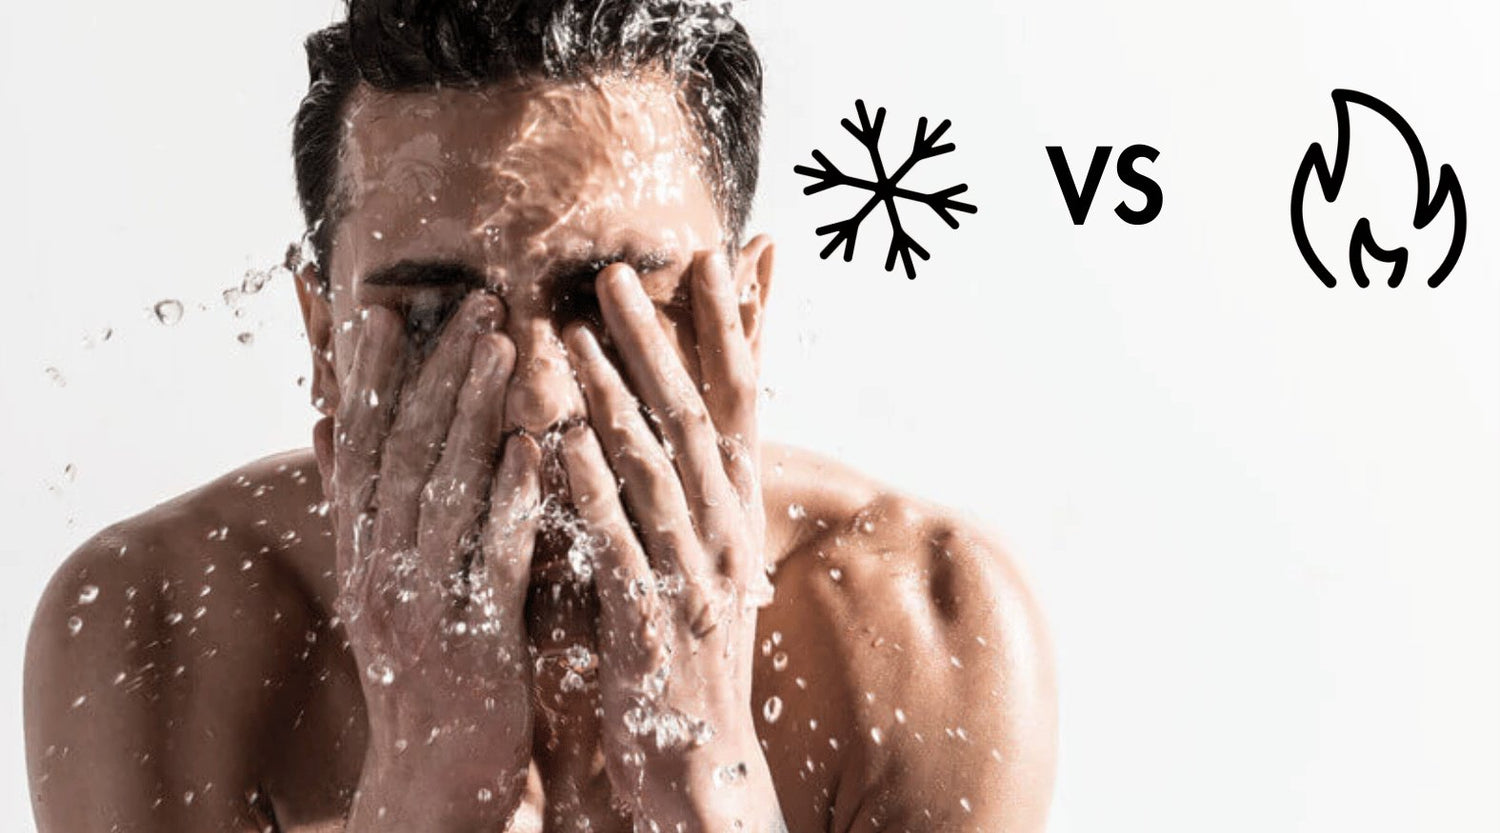 H20 SOS: Is It Good to Wash Your Face With Cold Water? - MOX Skincare